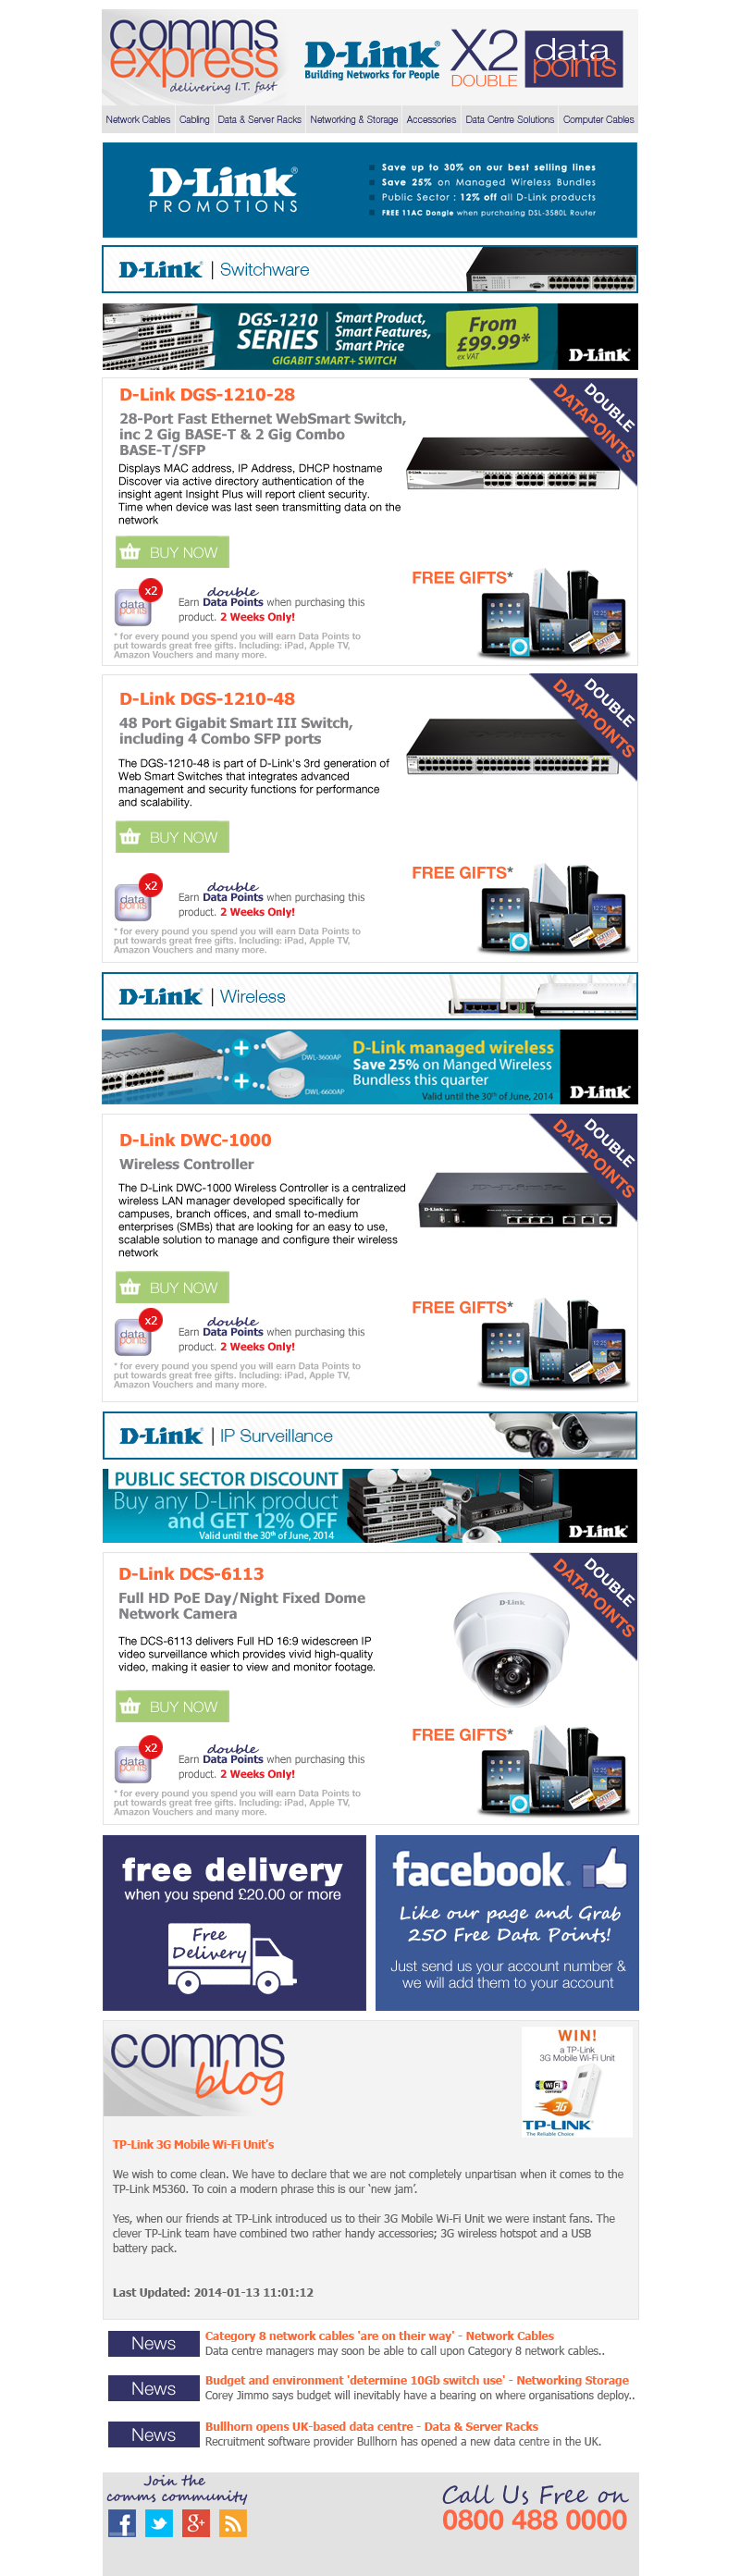 Great Promotions on DLink including Double Data Points 